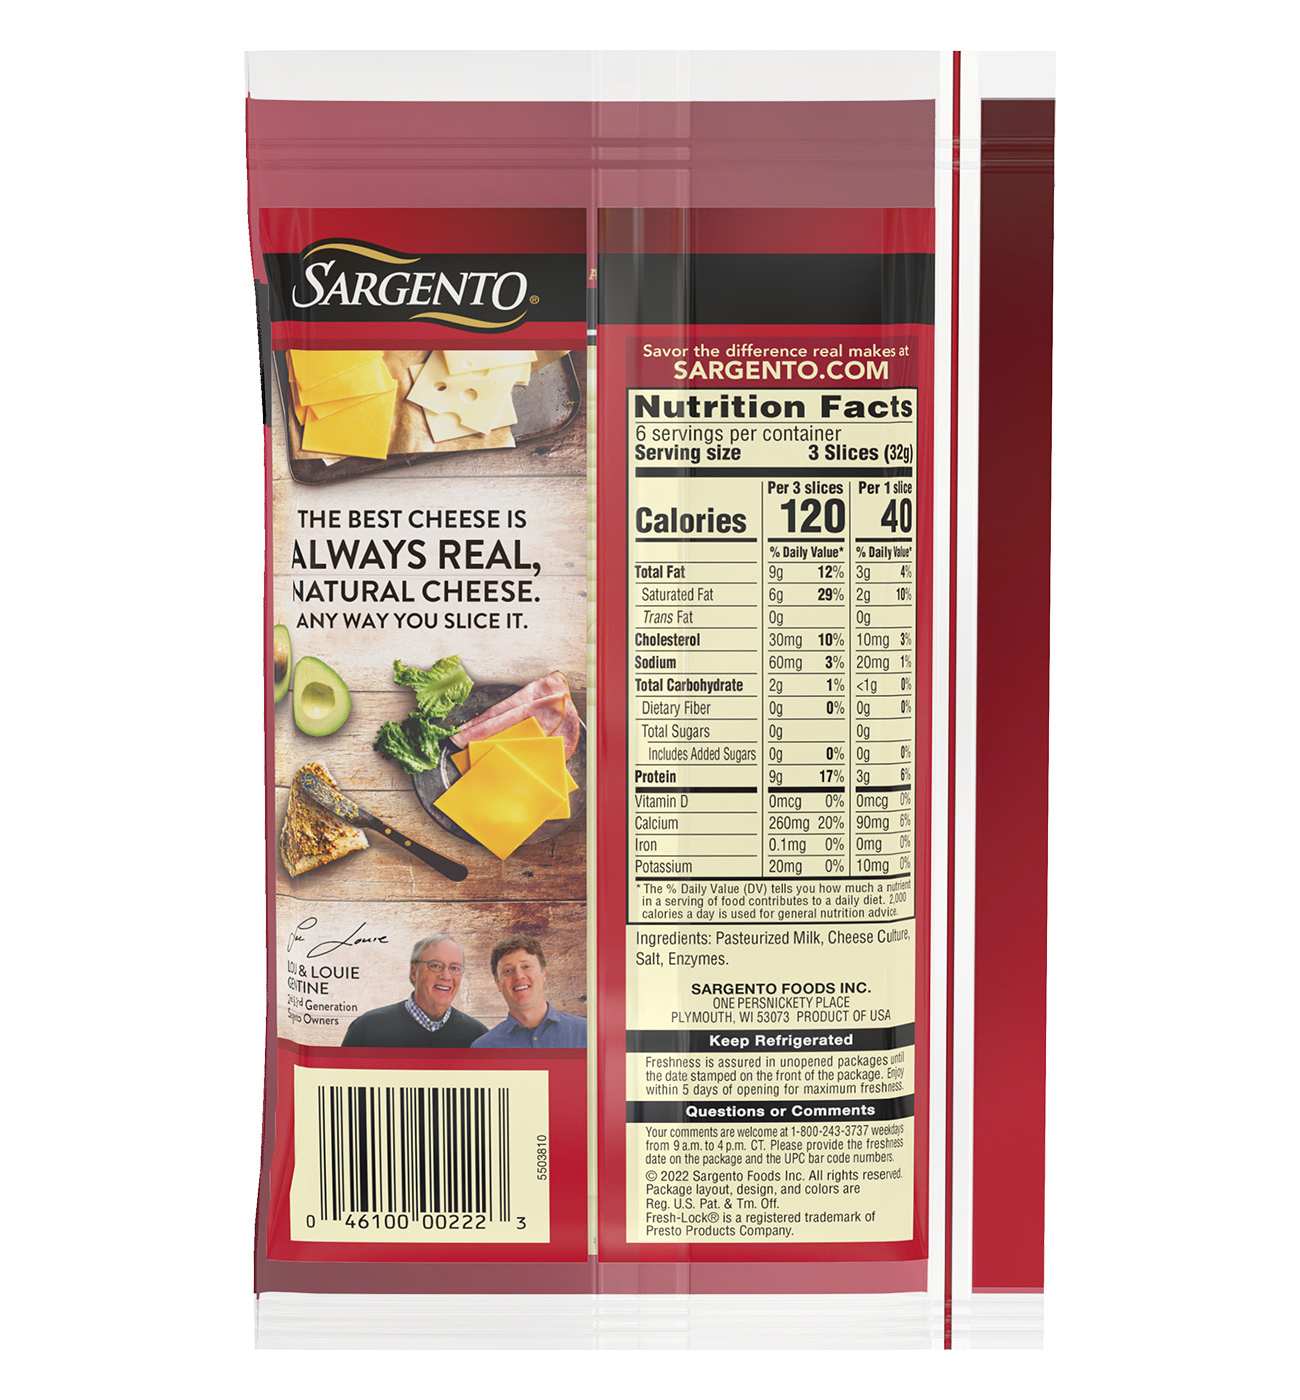 SARGENTO Swiss Ultra Thin Sliced Cheese; image 2 of 2